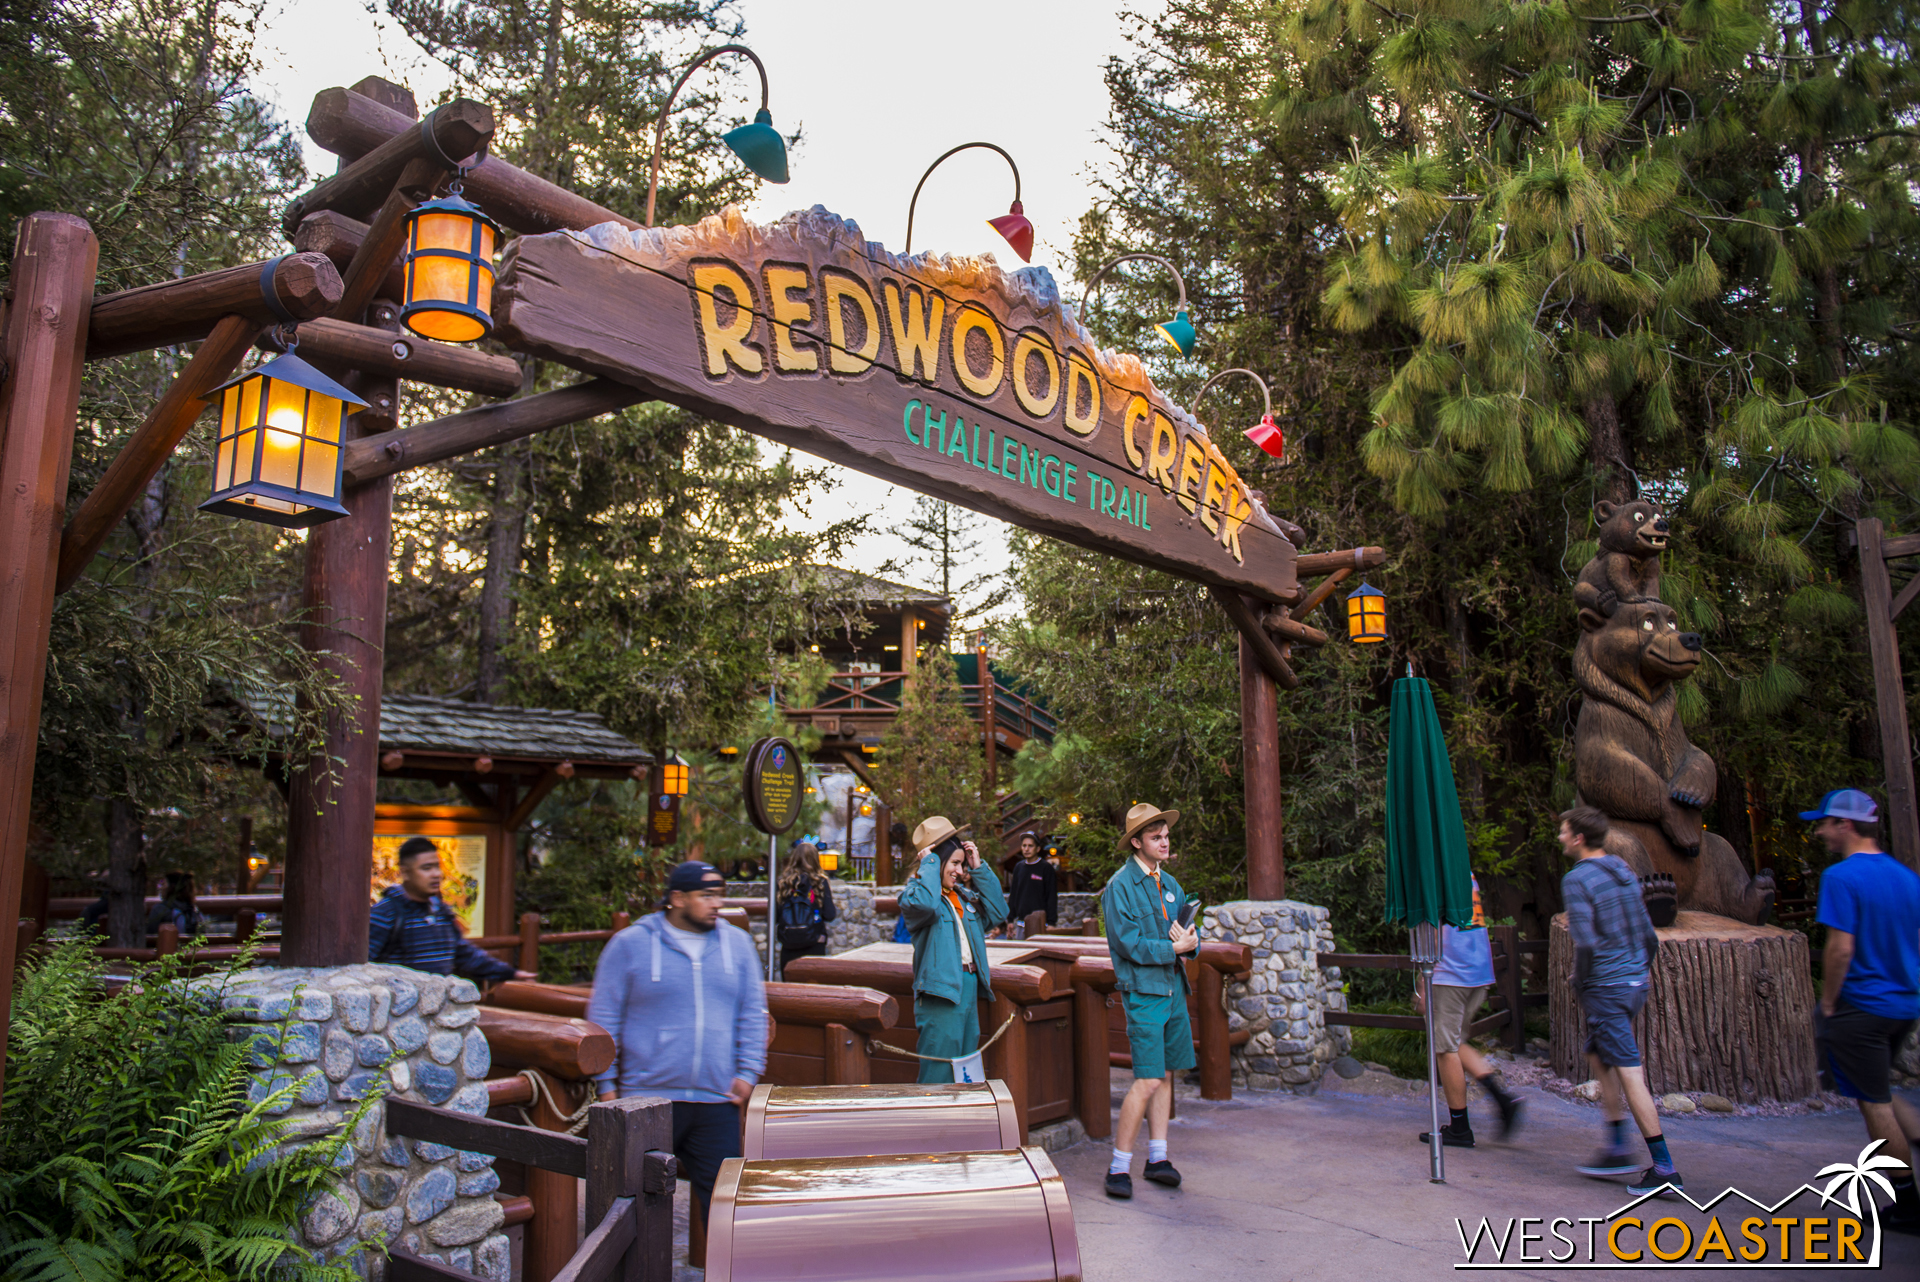  The Redwood Creek Challenge Trail has reopened over in Disney California Adventure. 